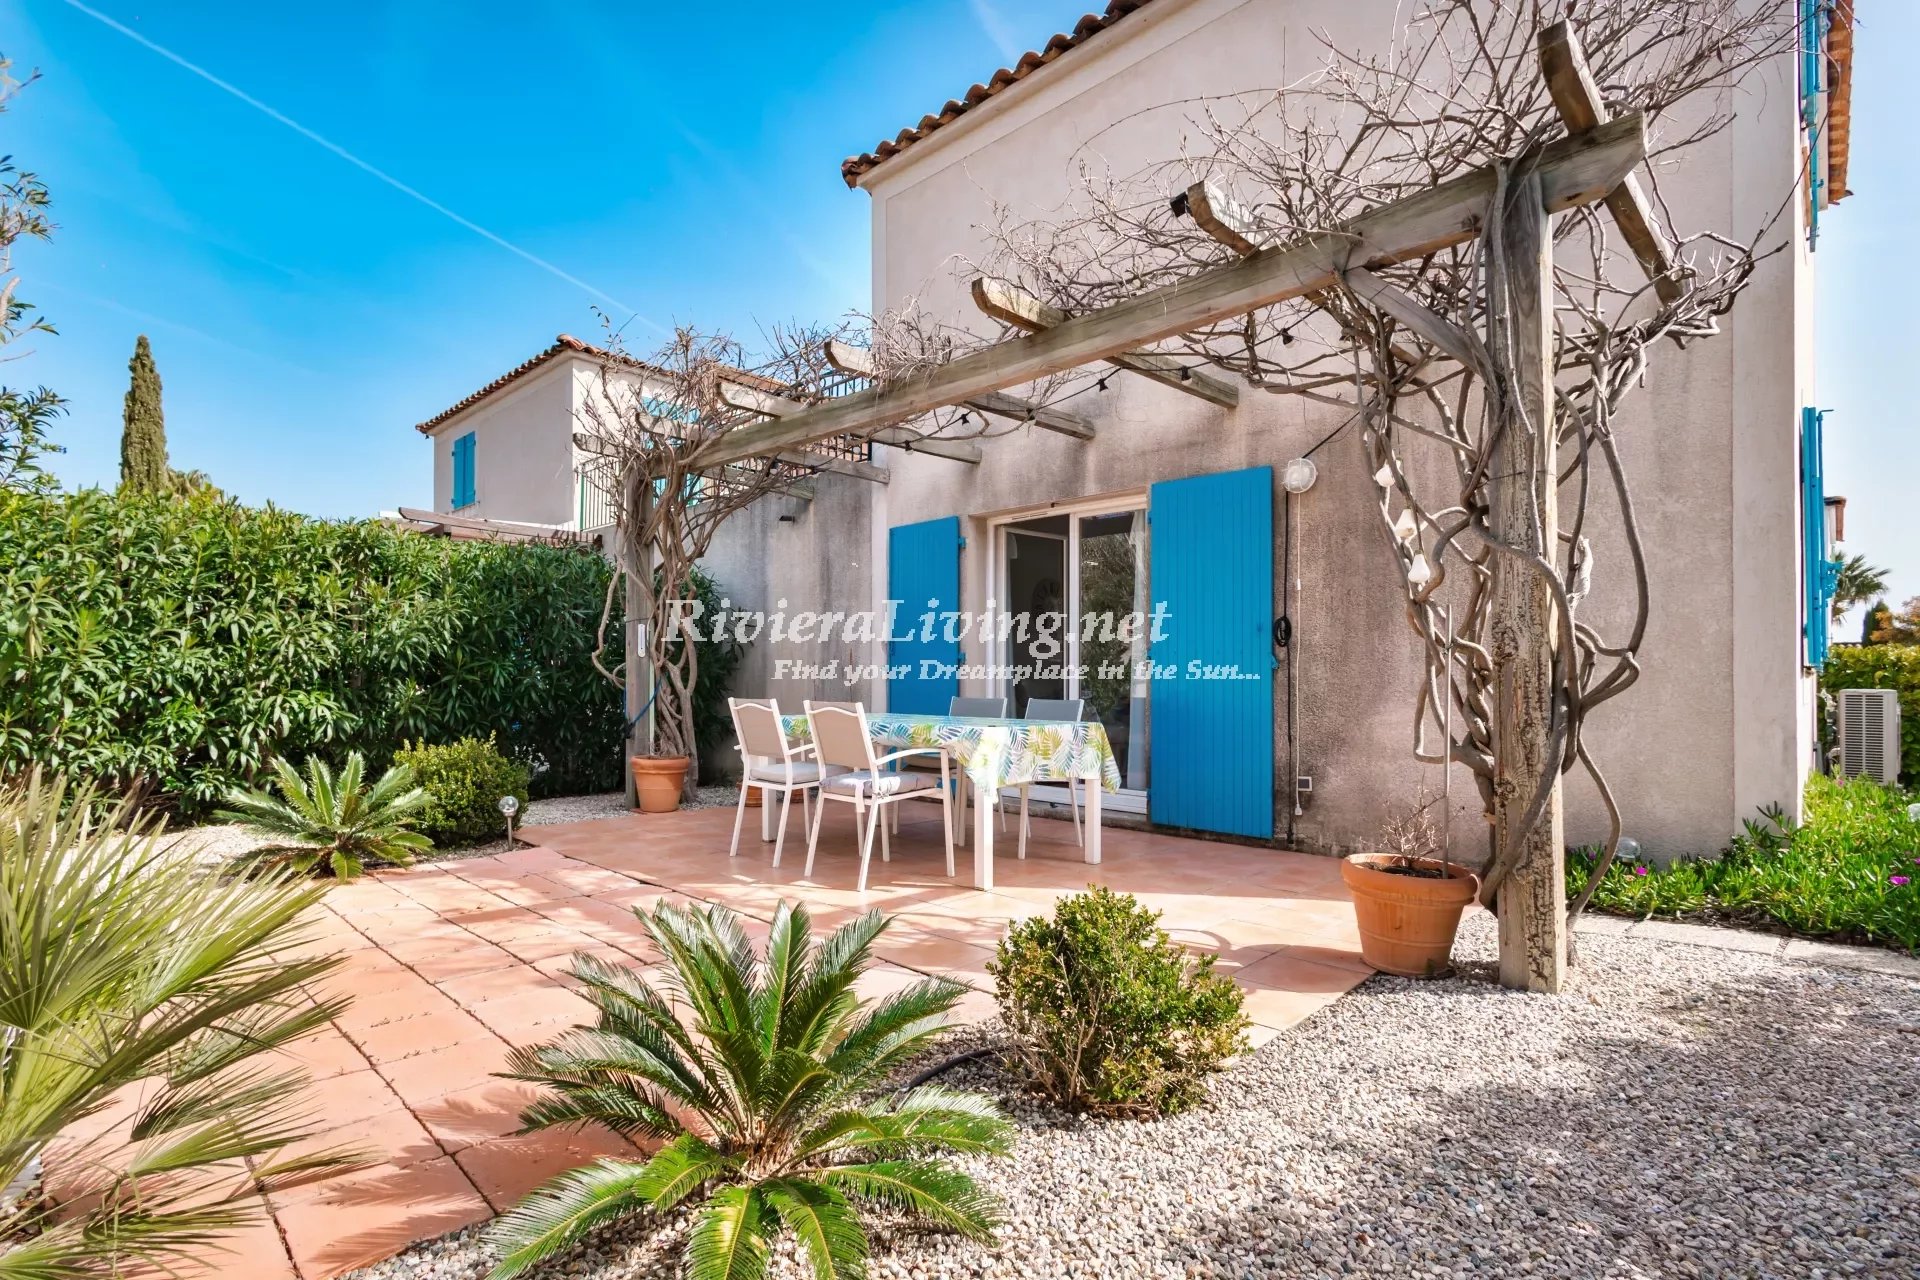 ROQUEBRUNE SUR ARGENS - SMALL HOUSE WITH POOL NEAR THE GOLF